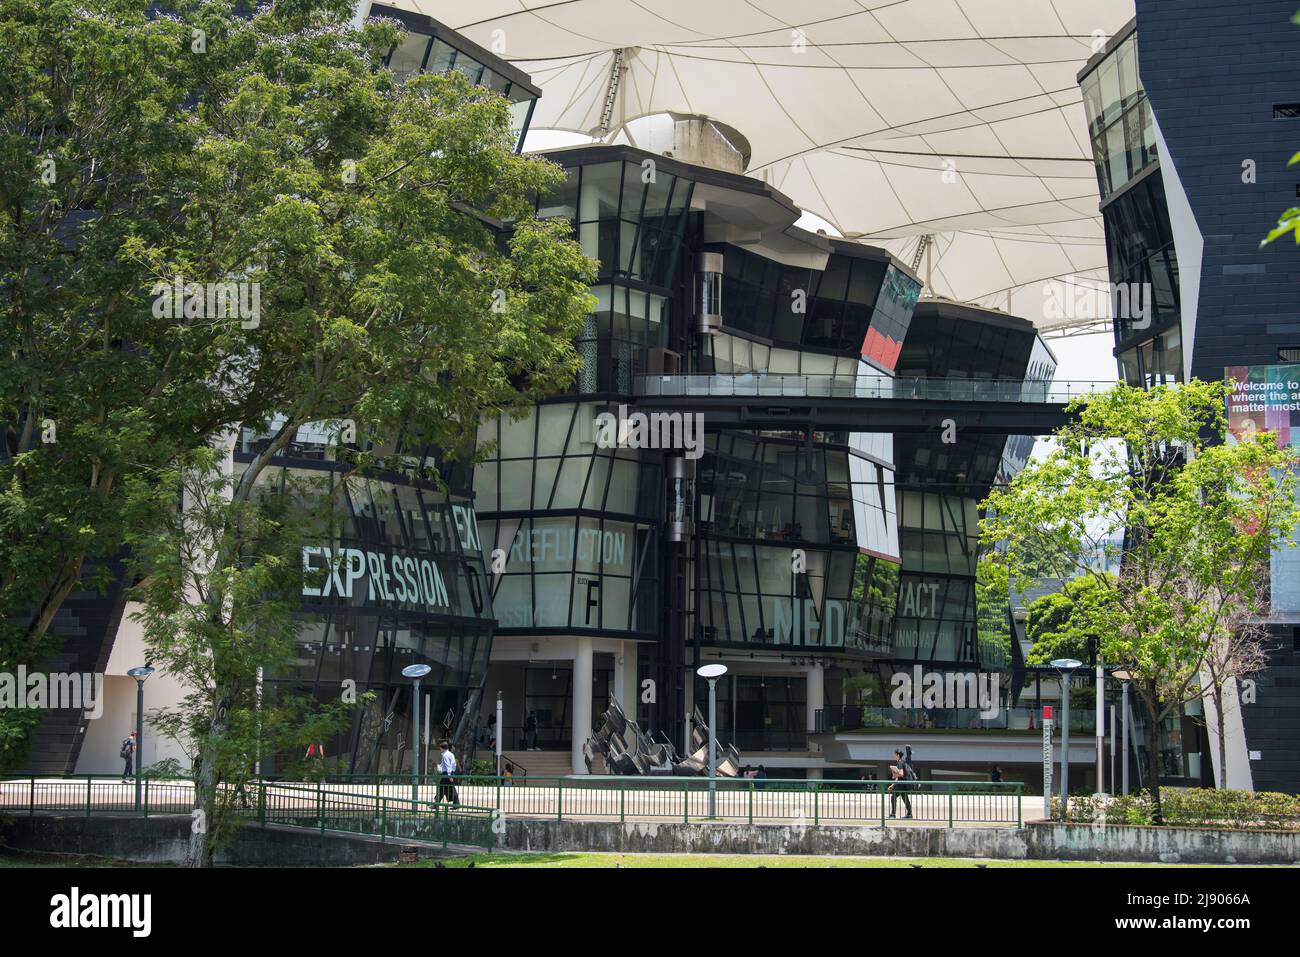 Singapore, Singapore - September 08, 2019: Students The Lasalle College of the Arts in Singapore. Stock Photo